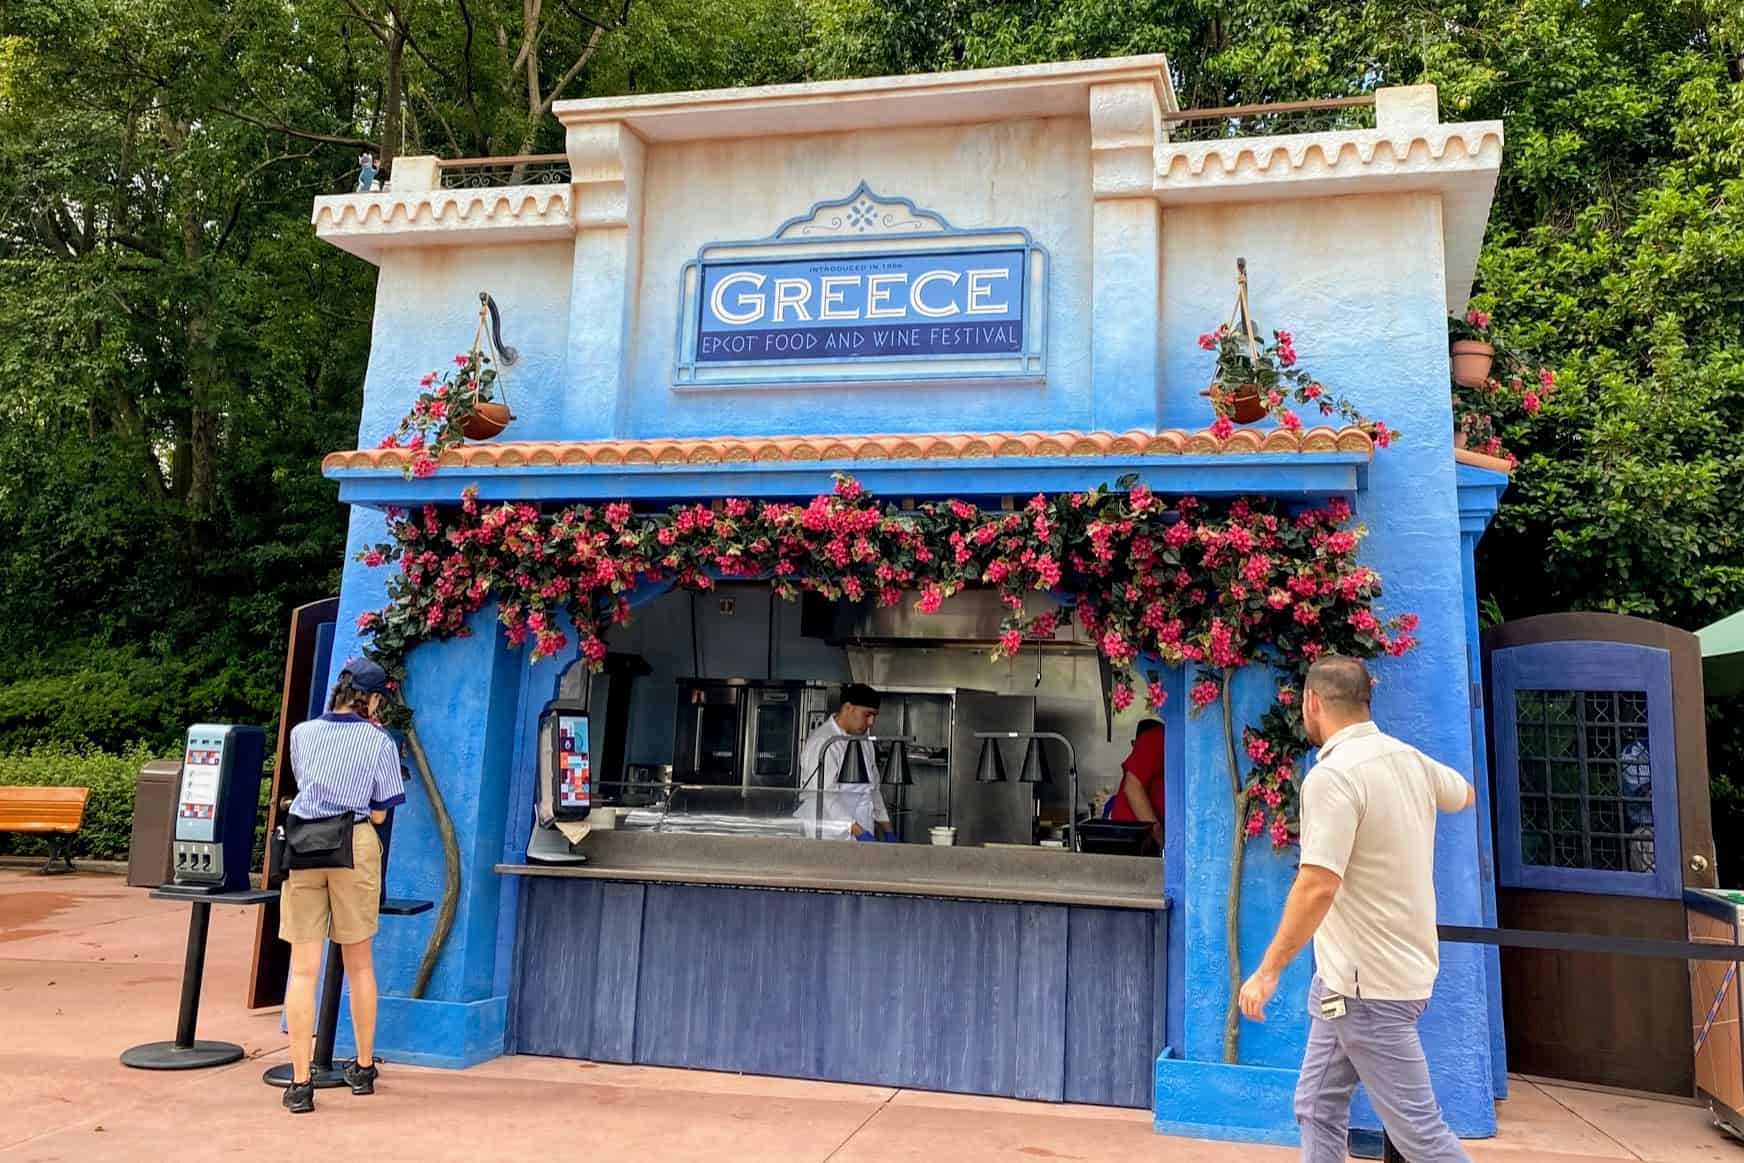 Greece Booth Menu & Review (2021 Epcot Food & Wine Festival)